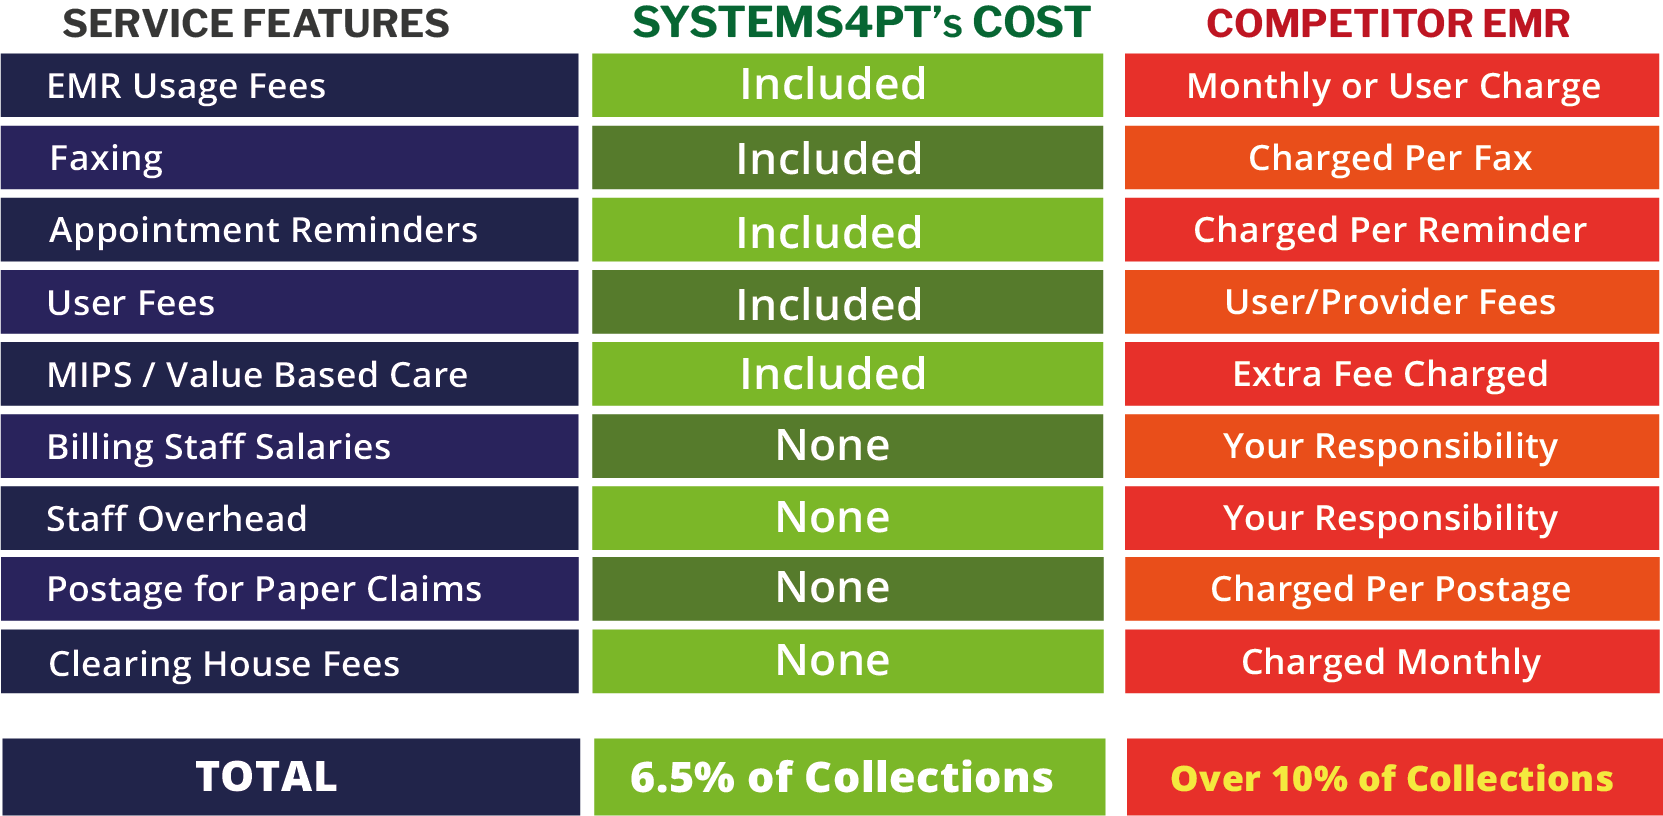 Compare Systems4PT's cost profile with competitor EMR's and see the real cost of your EMR